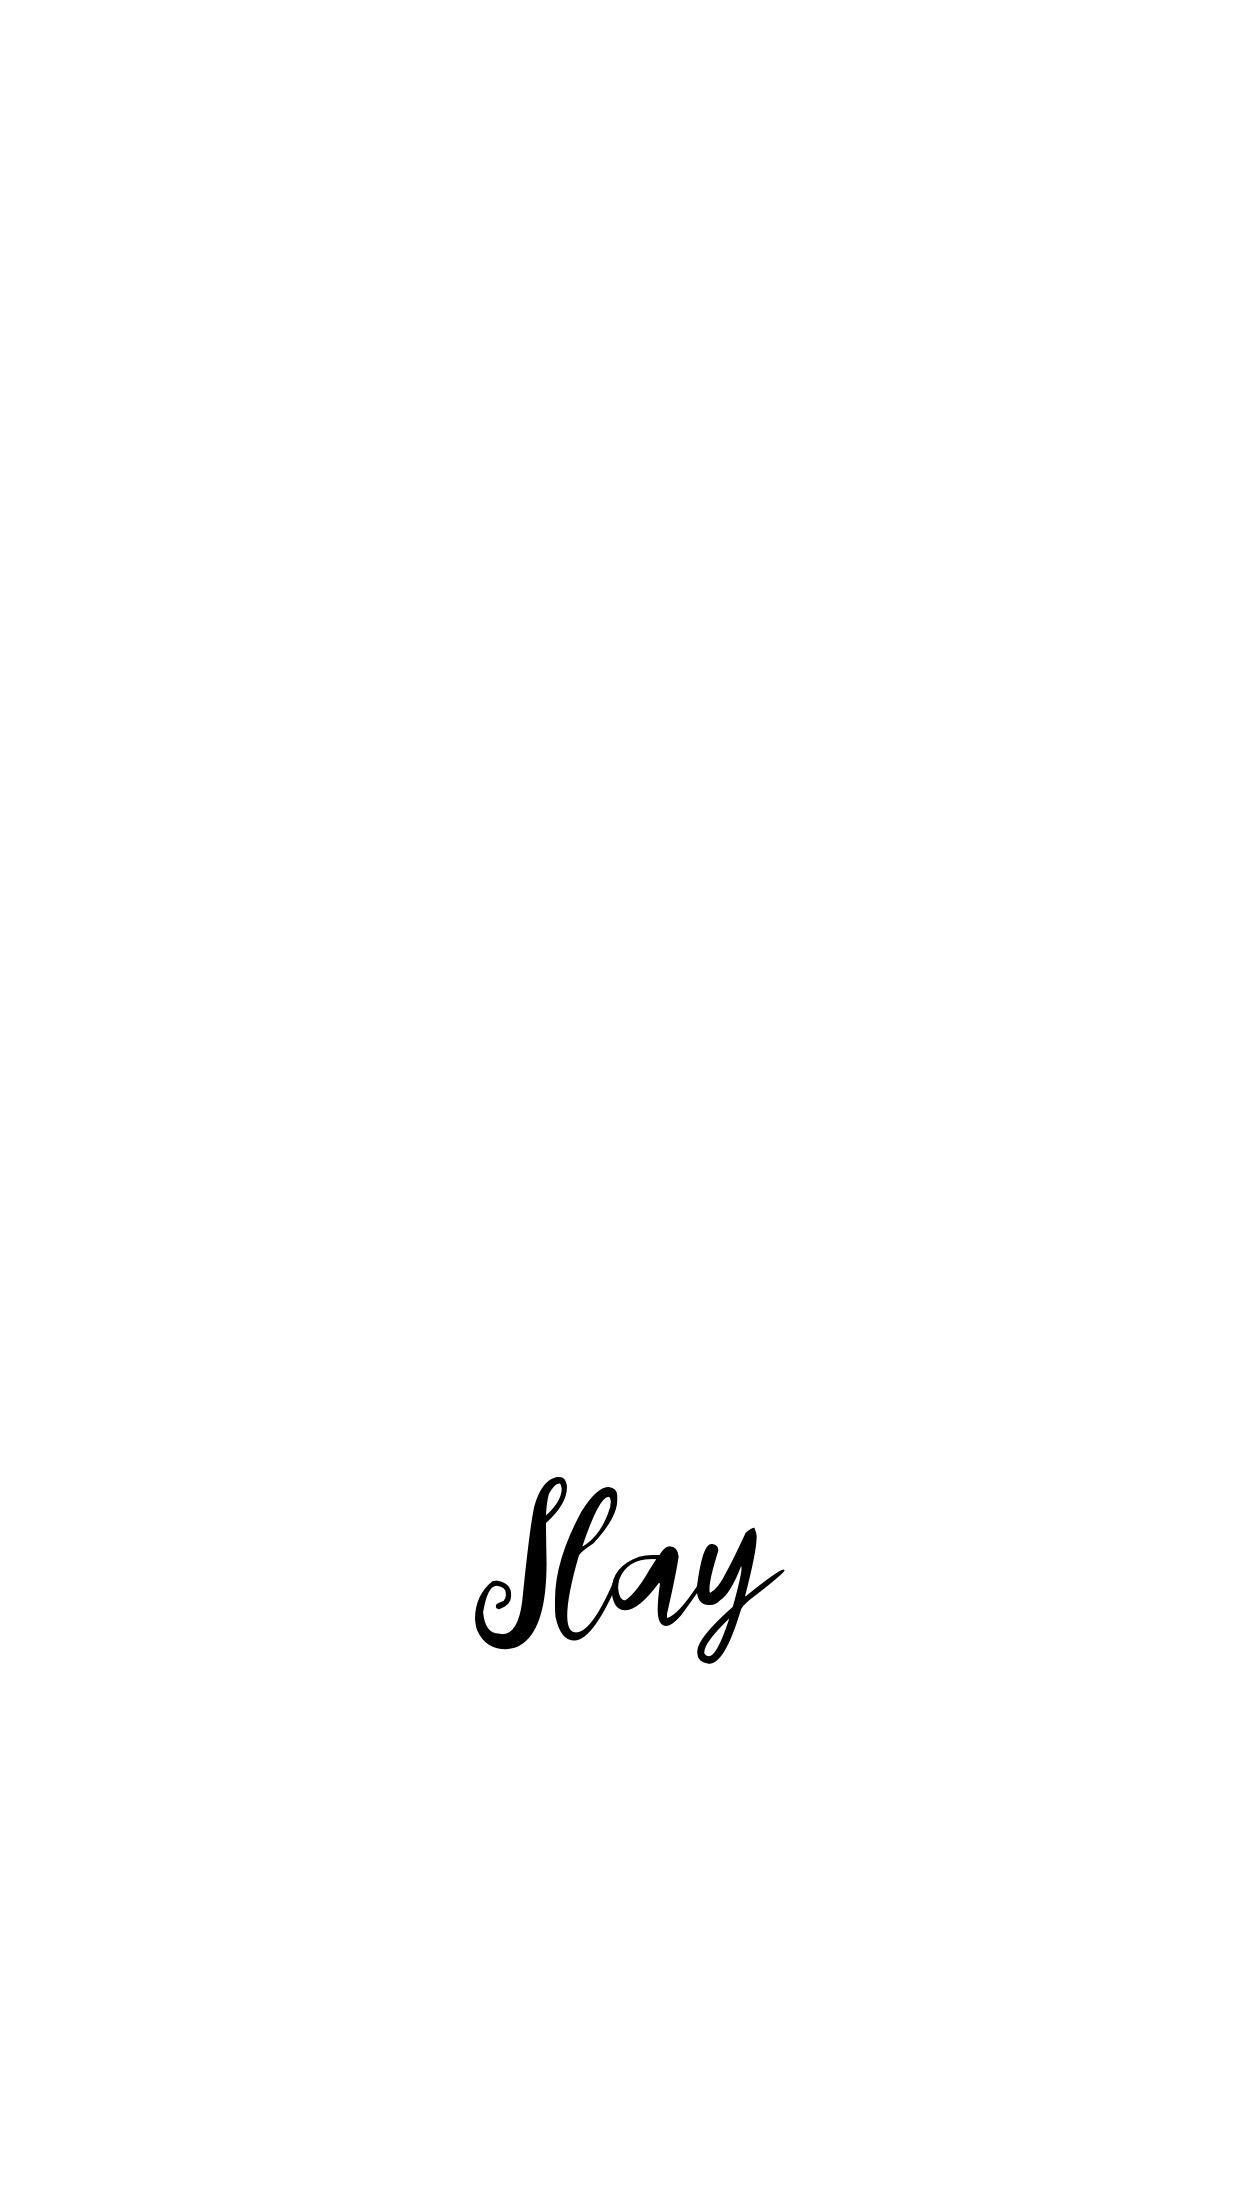 Simple White Aesthetic Wallpapers   Top Free Simple White